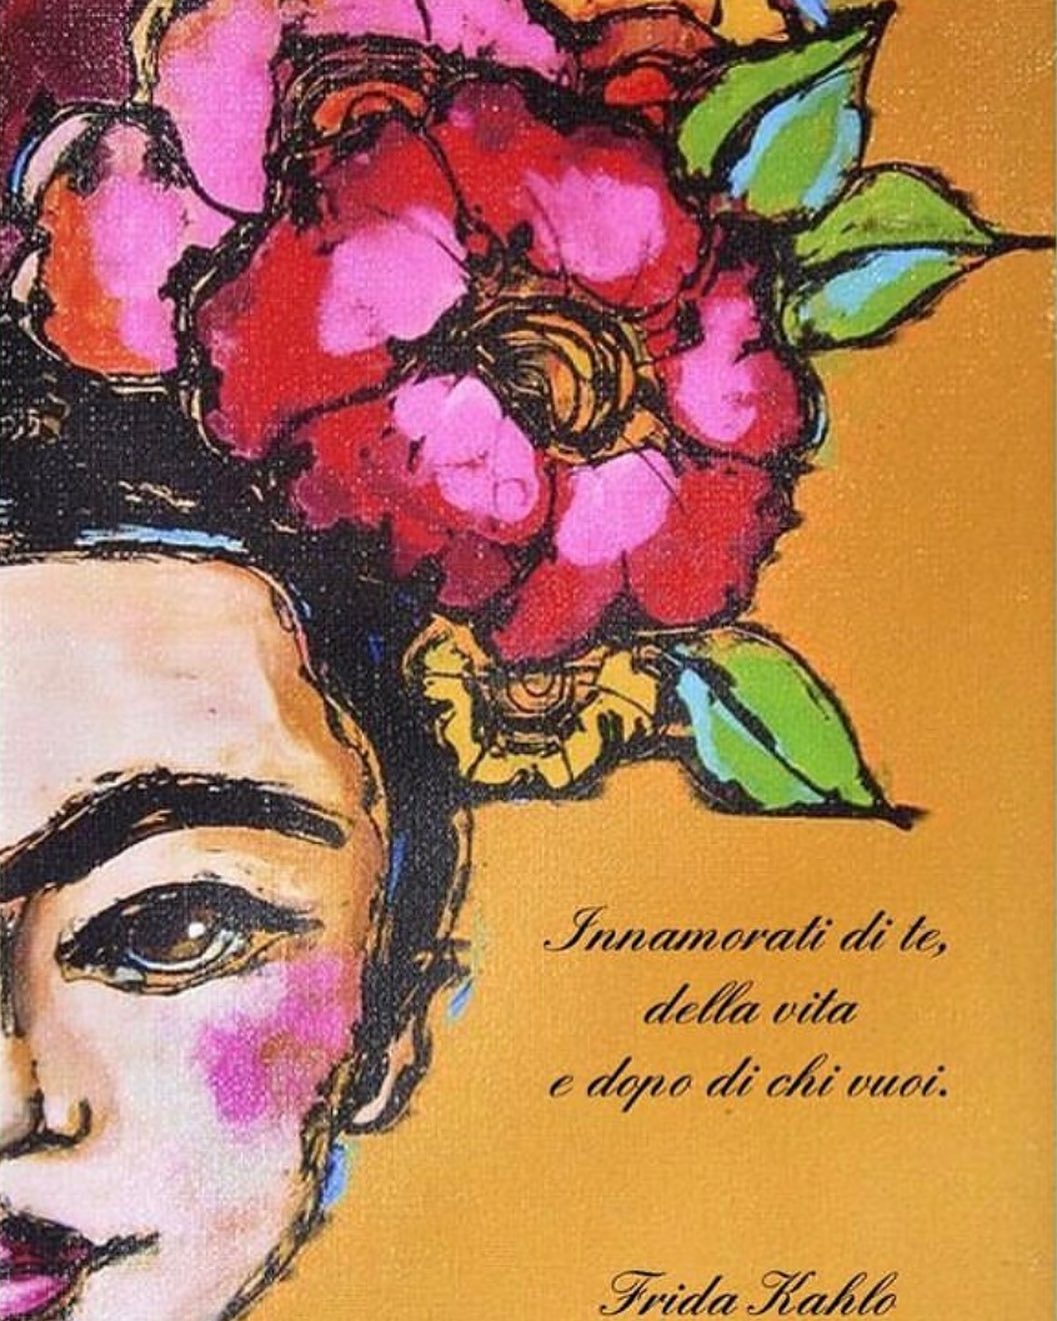 My favourite Frida Kahlo’s quote.
Truth is in every word.
#fridakahlo#famousquotes
#mexicanpainting
#fridalove